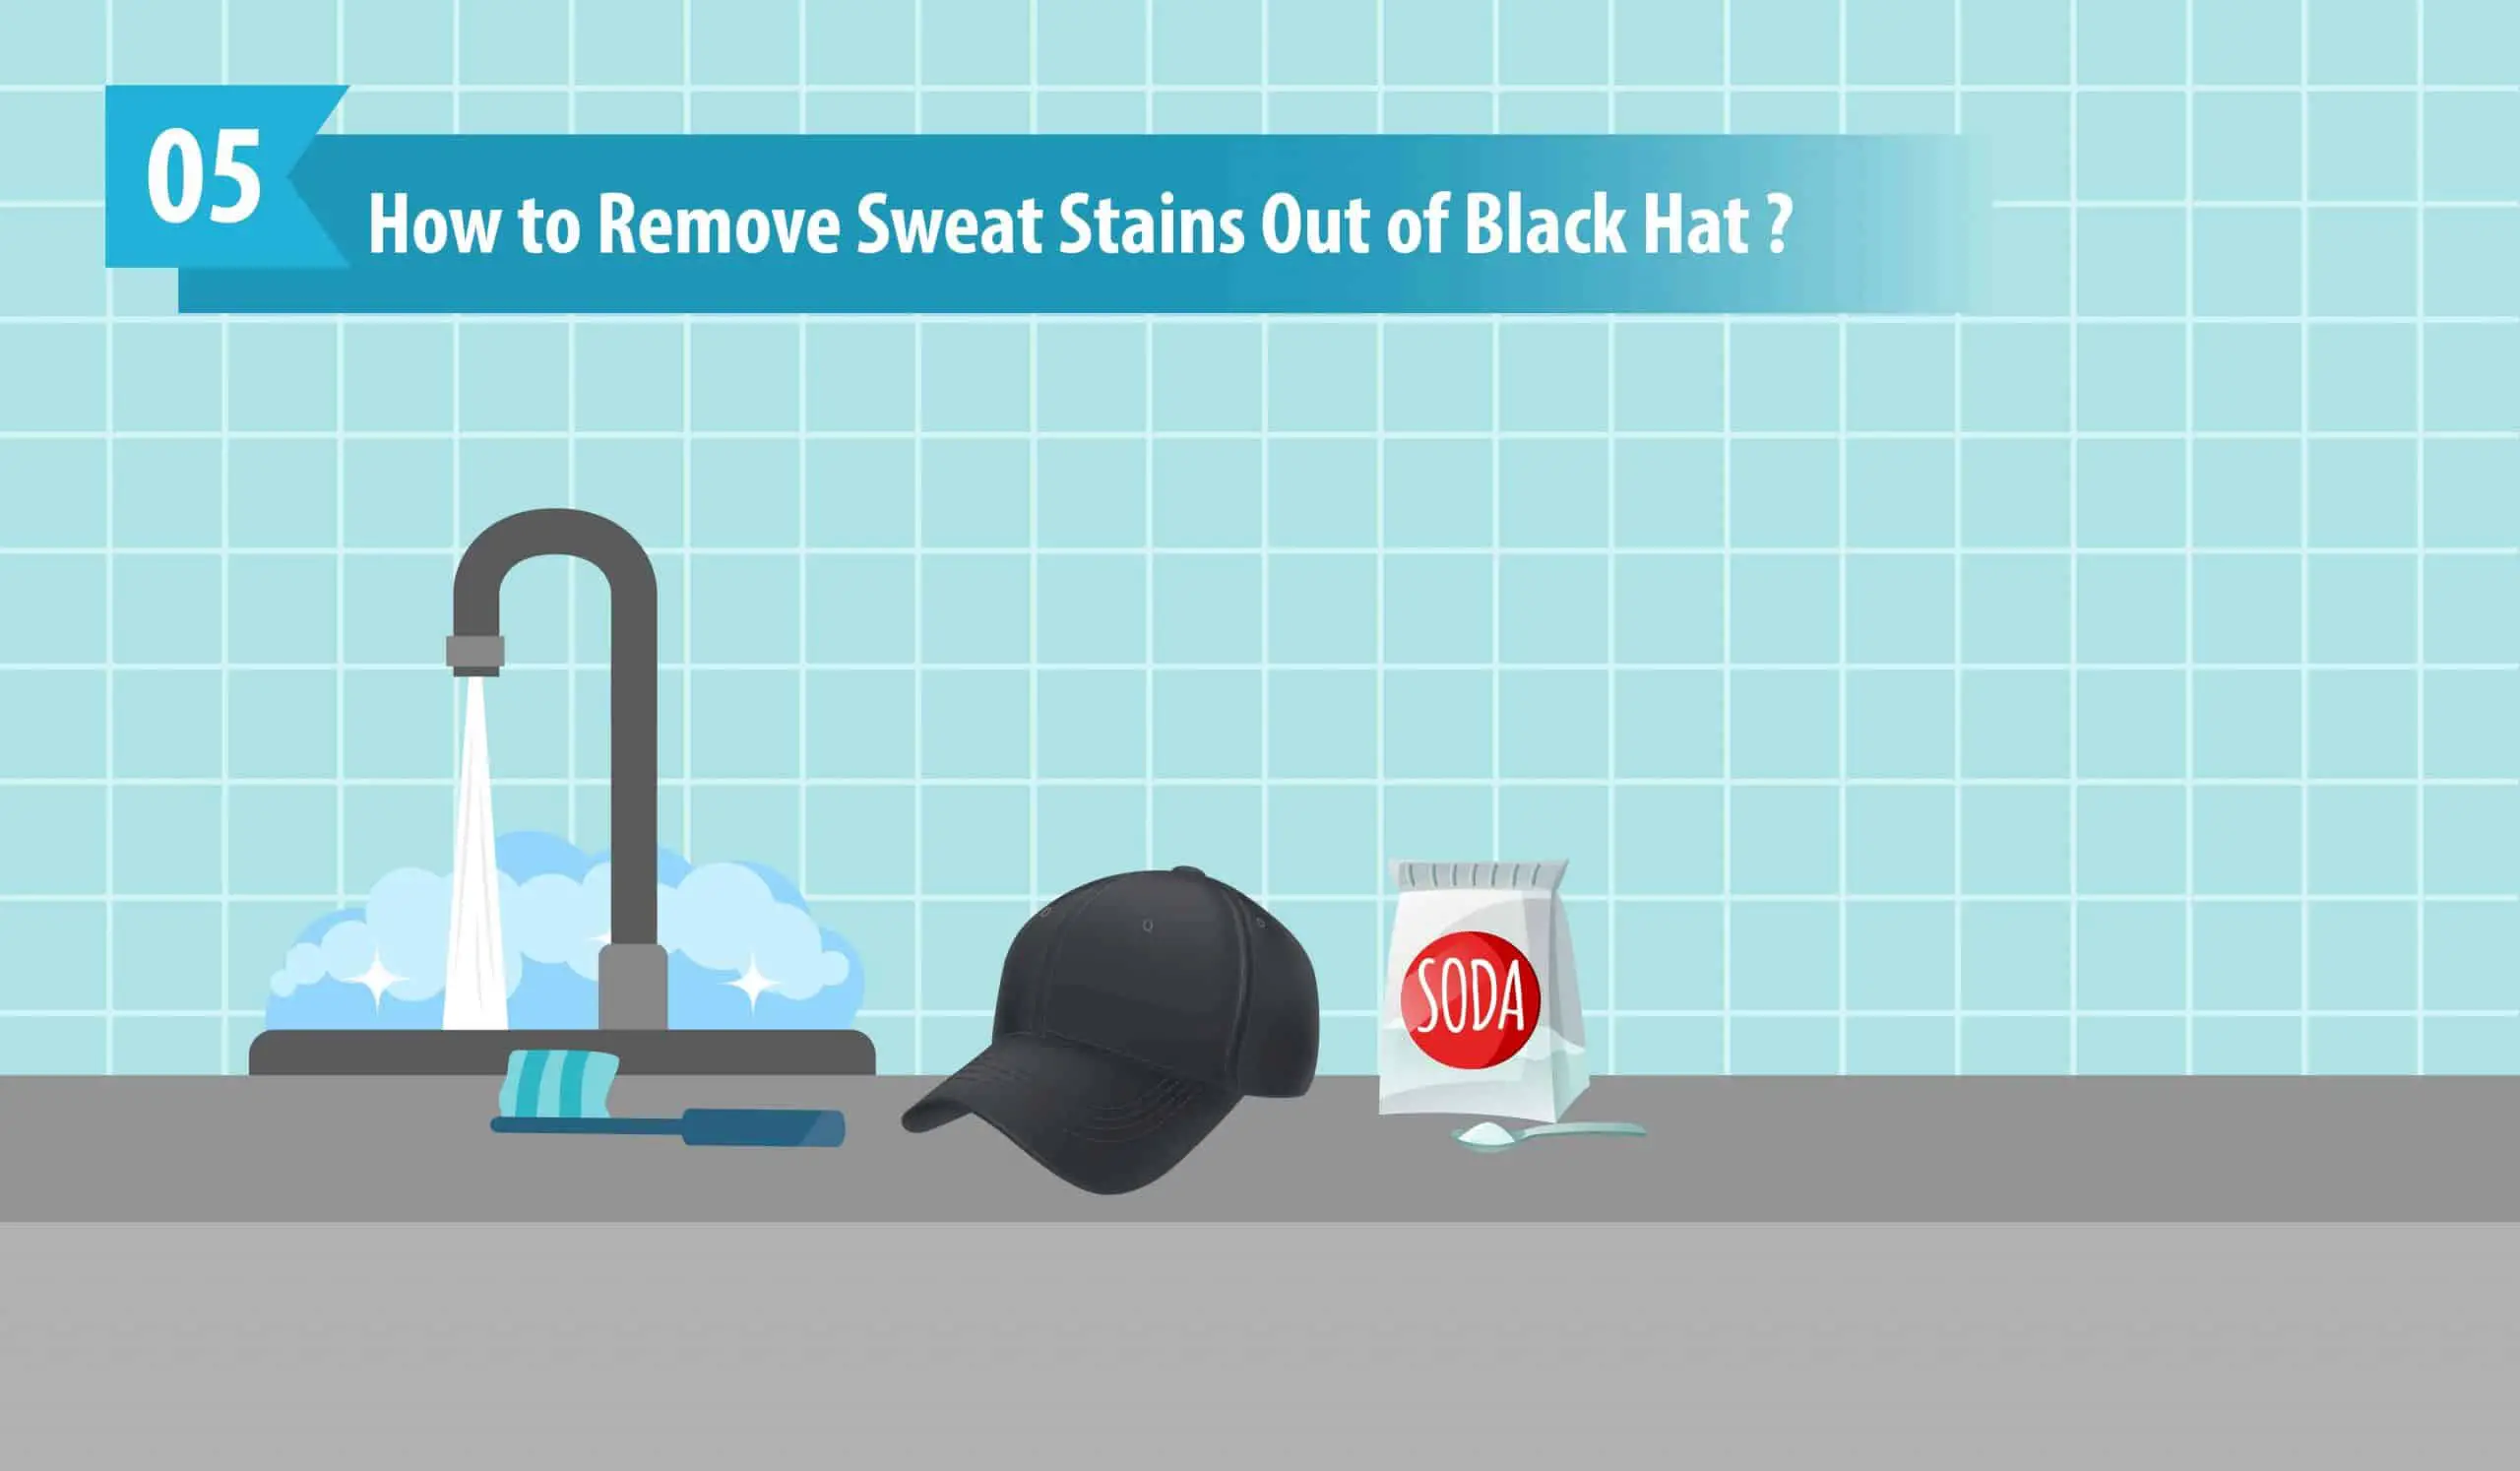 How to Remove Sweat Stains Out of Black Hat